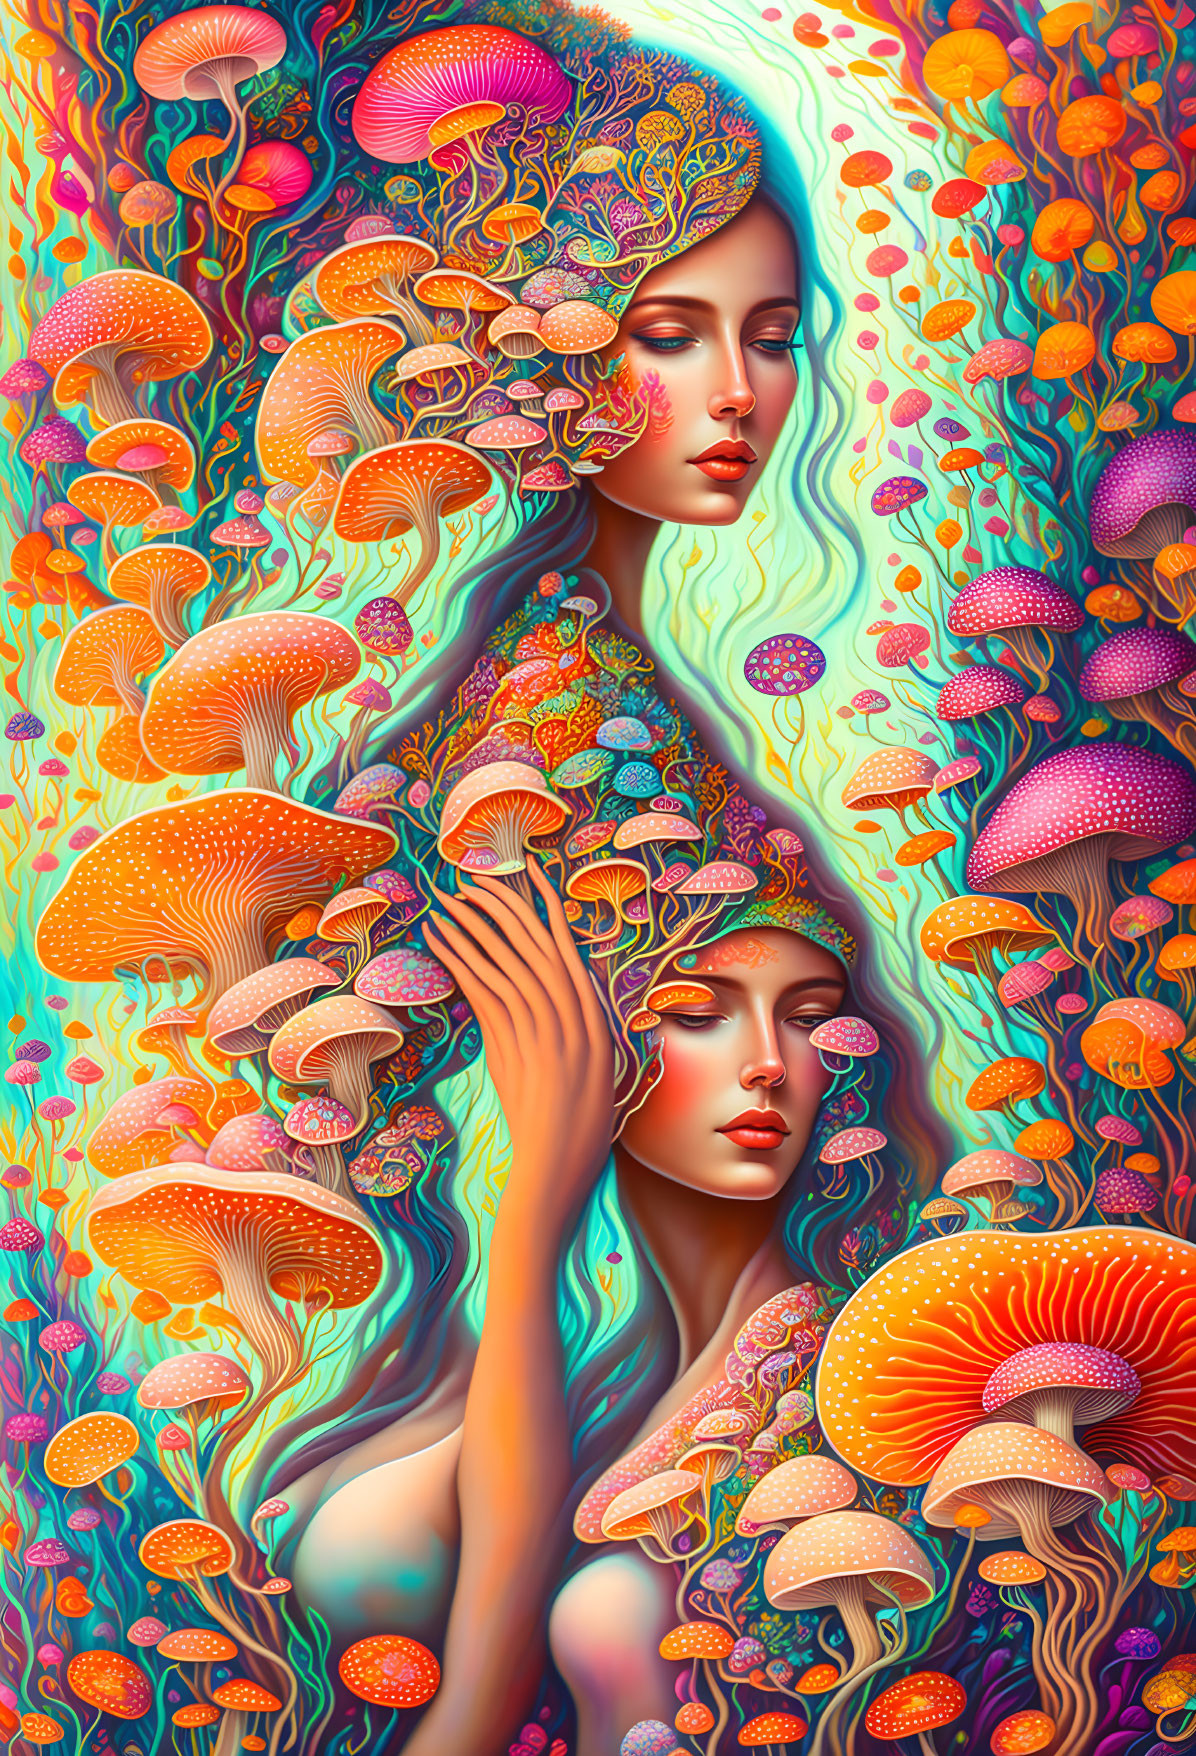 Vivid illustration of two women with flowing hair and fantastical mushrooms